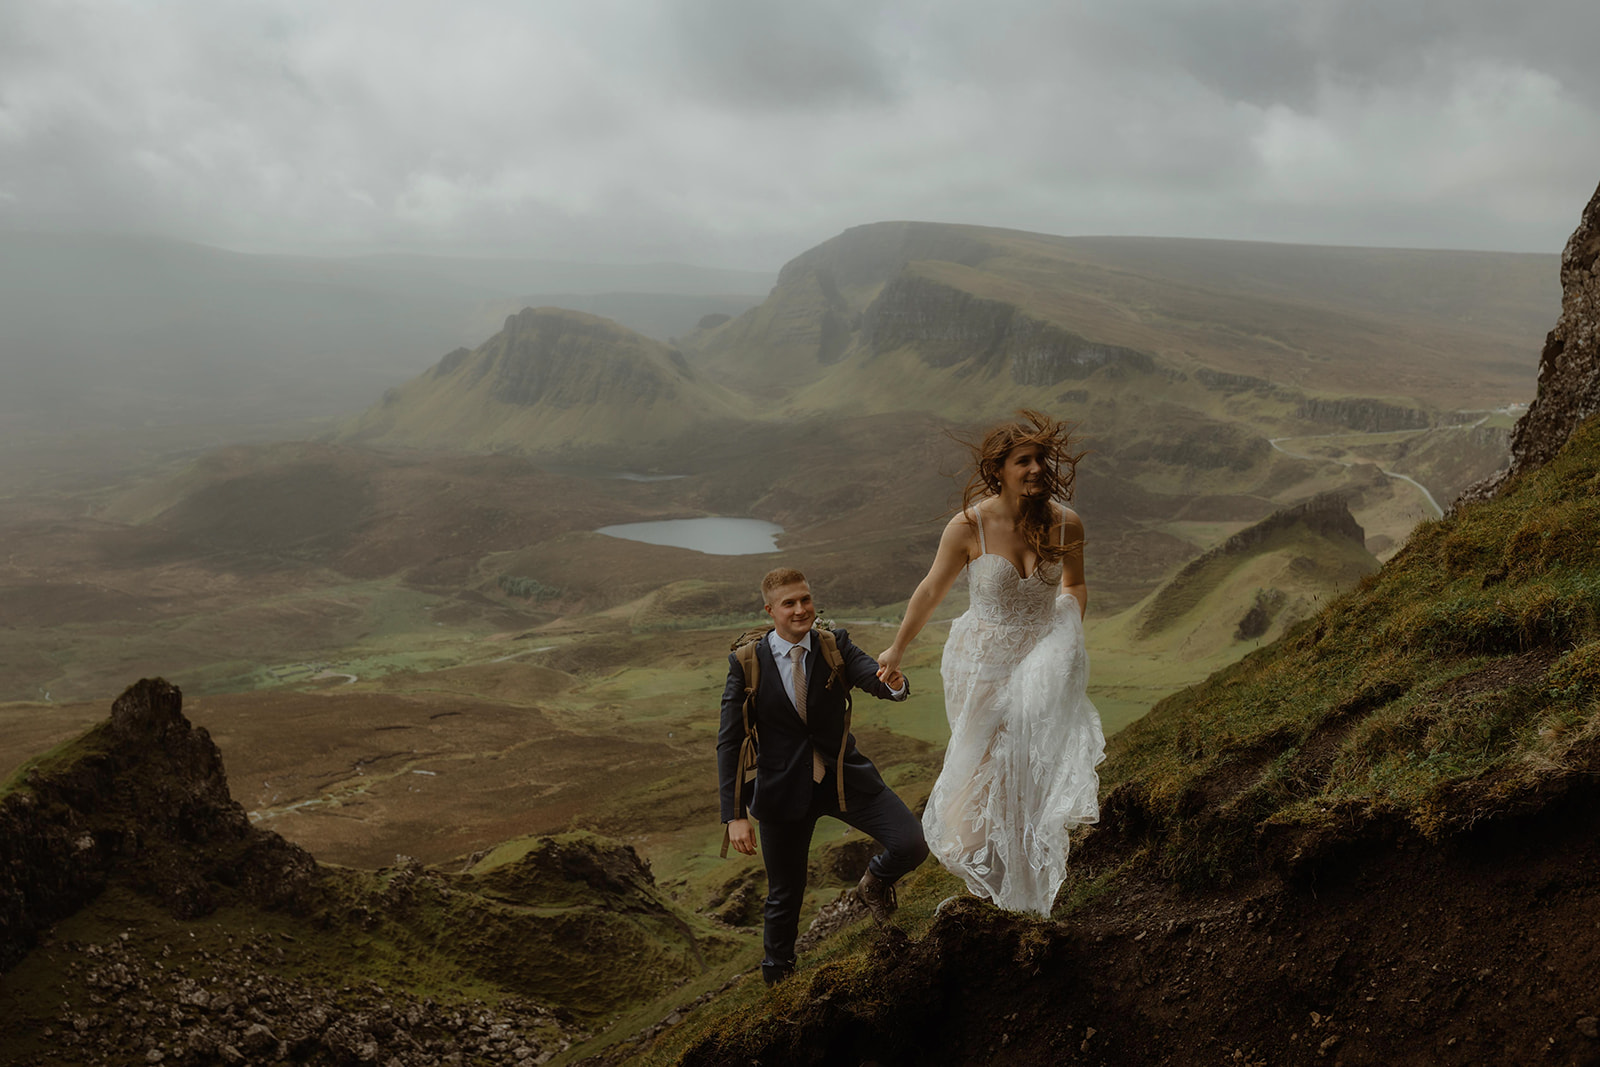 Emma and Matthew had a romantic stroll during their elopement day at the beautiful Quiraing, Isle of Skye